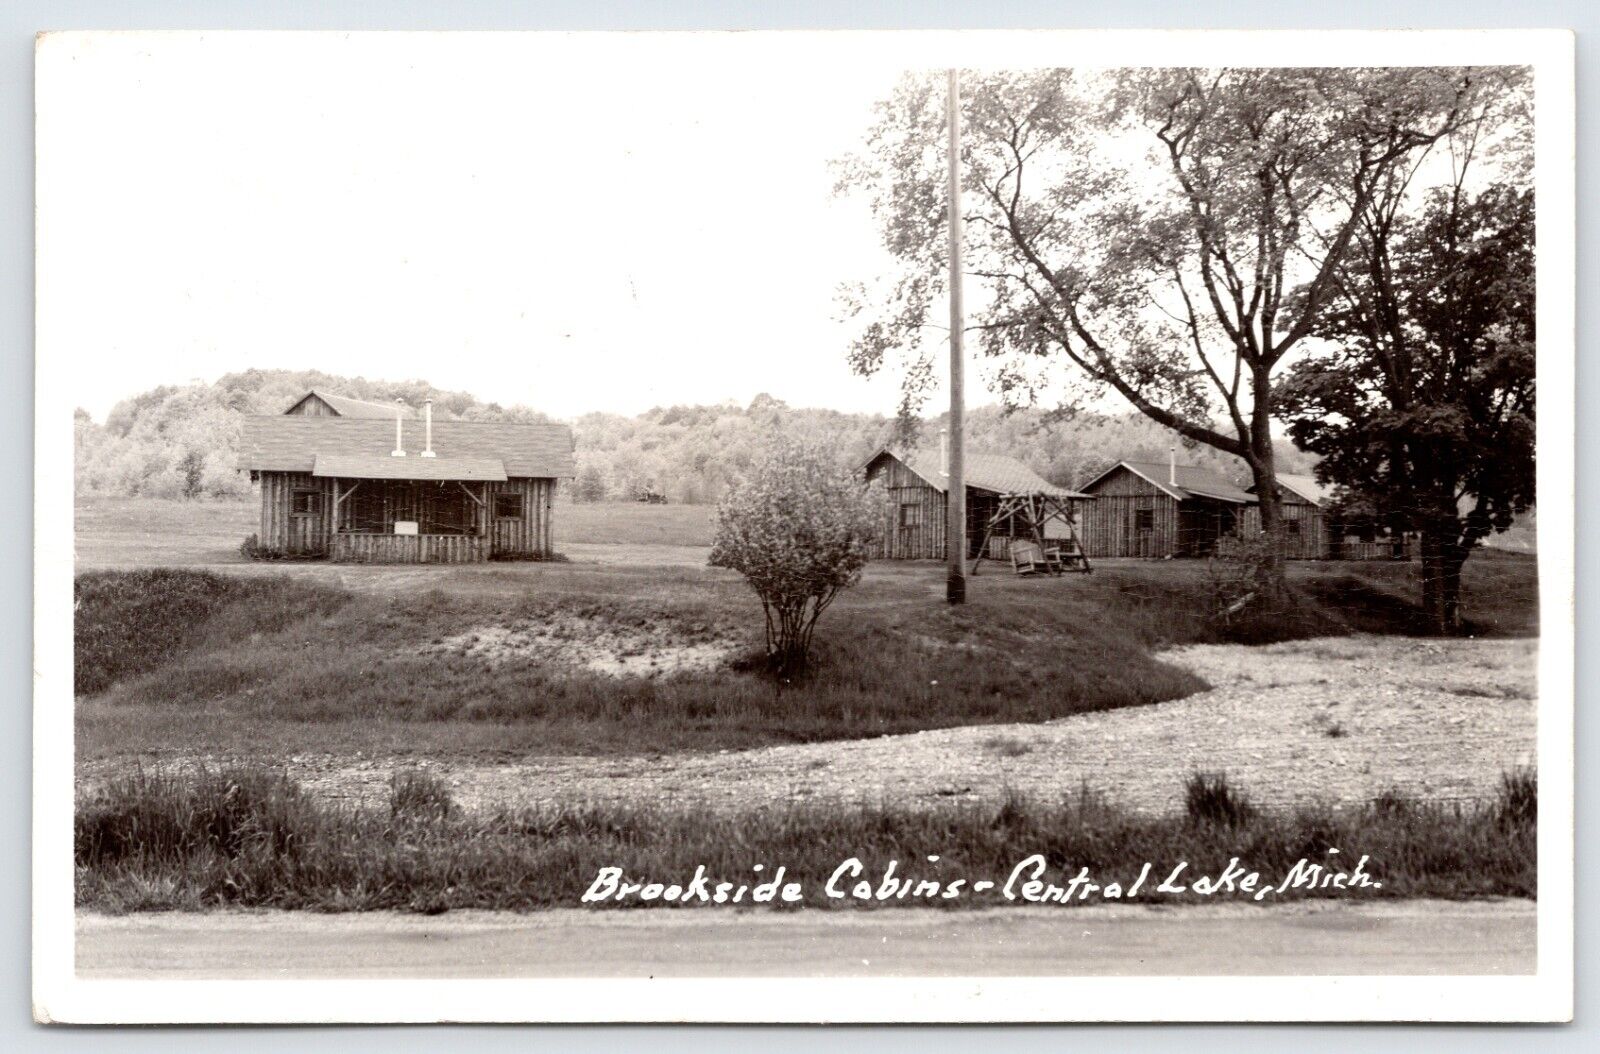 Postcard RPPC, Brookside Cabins, Central Lake, Michigan Posted 1949